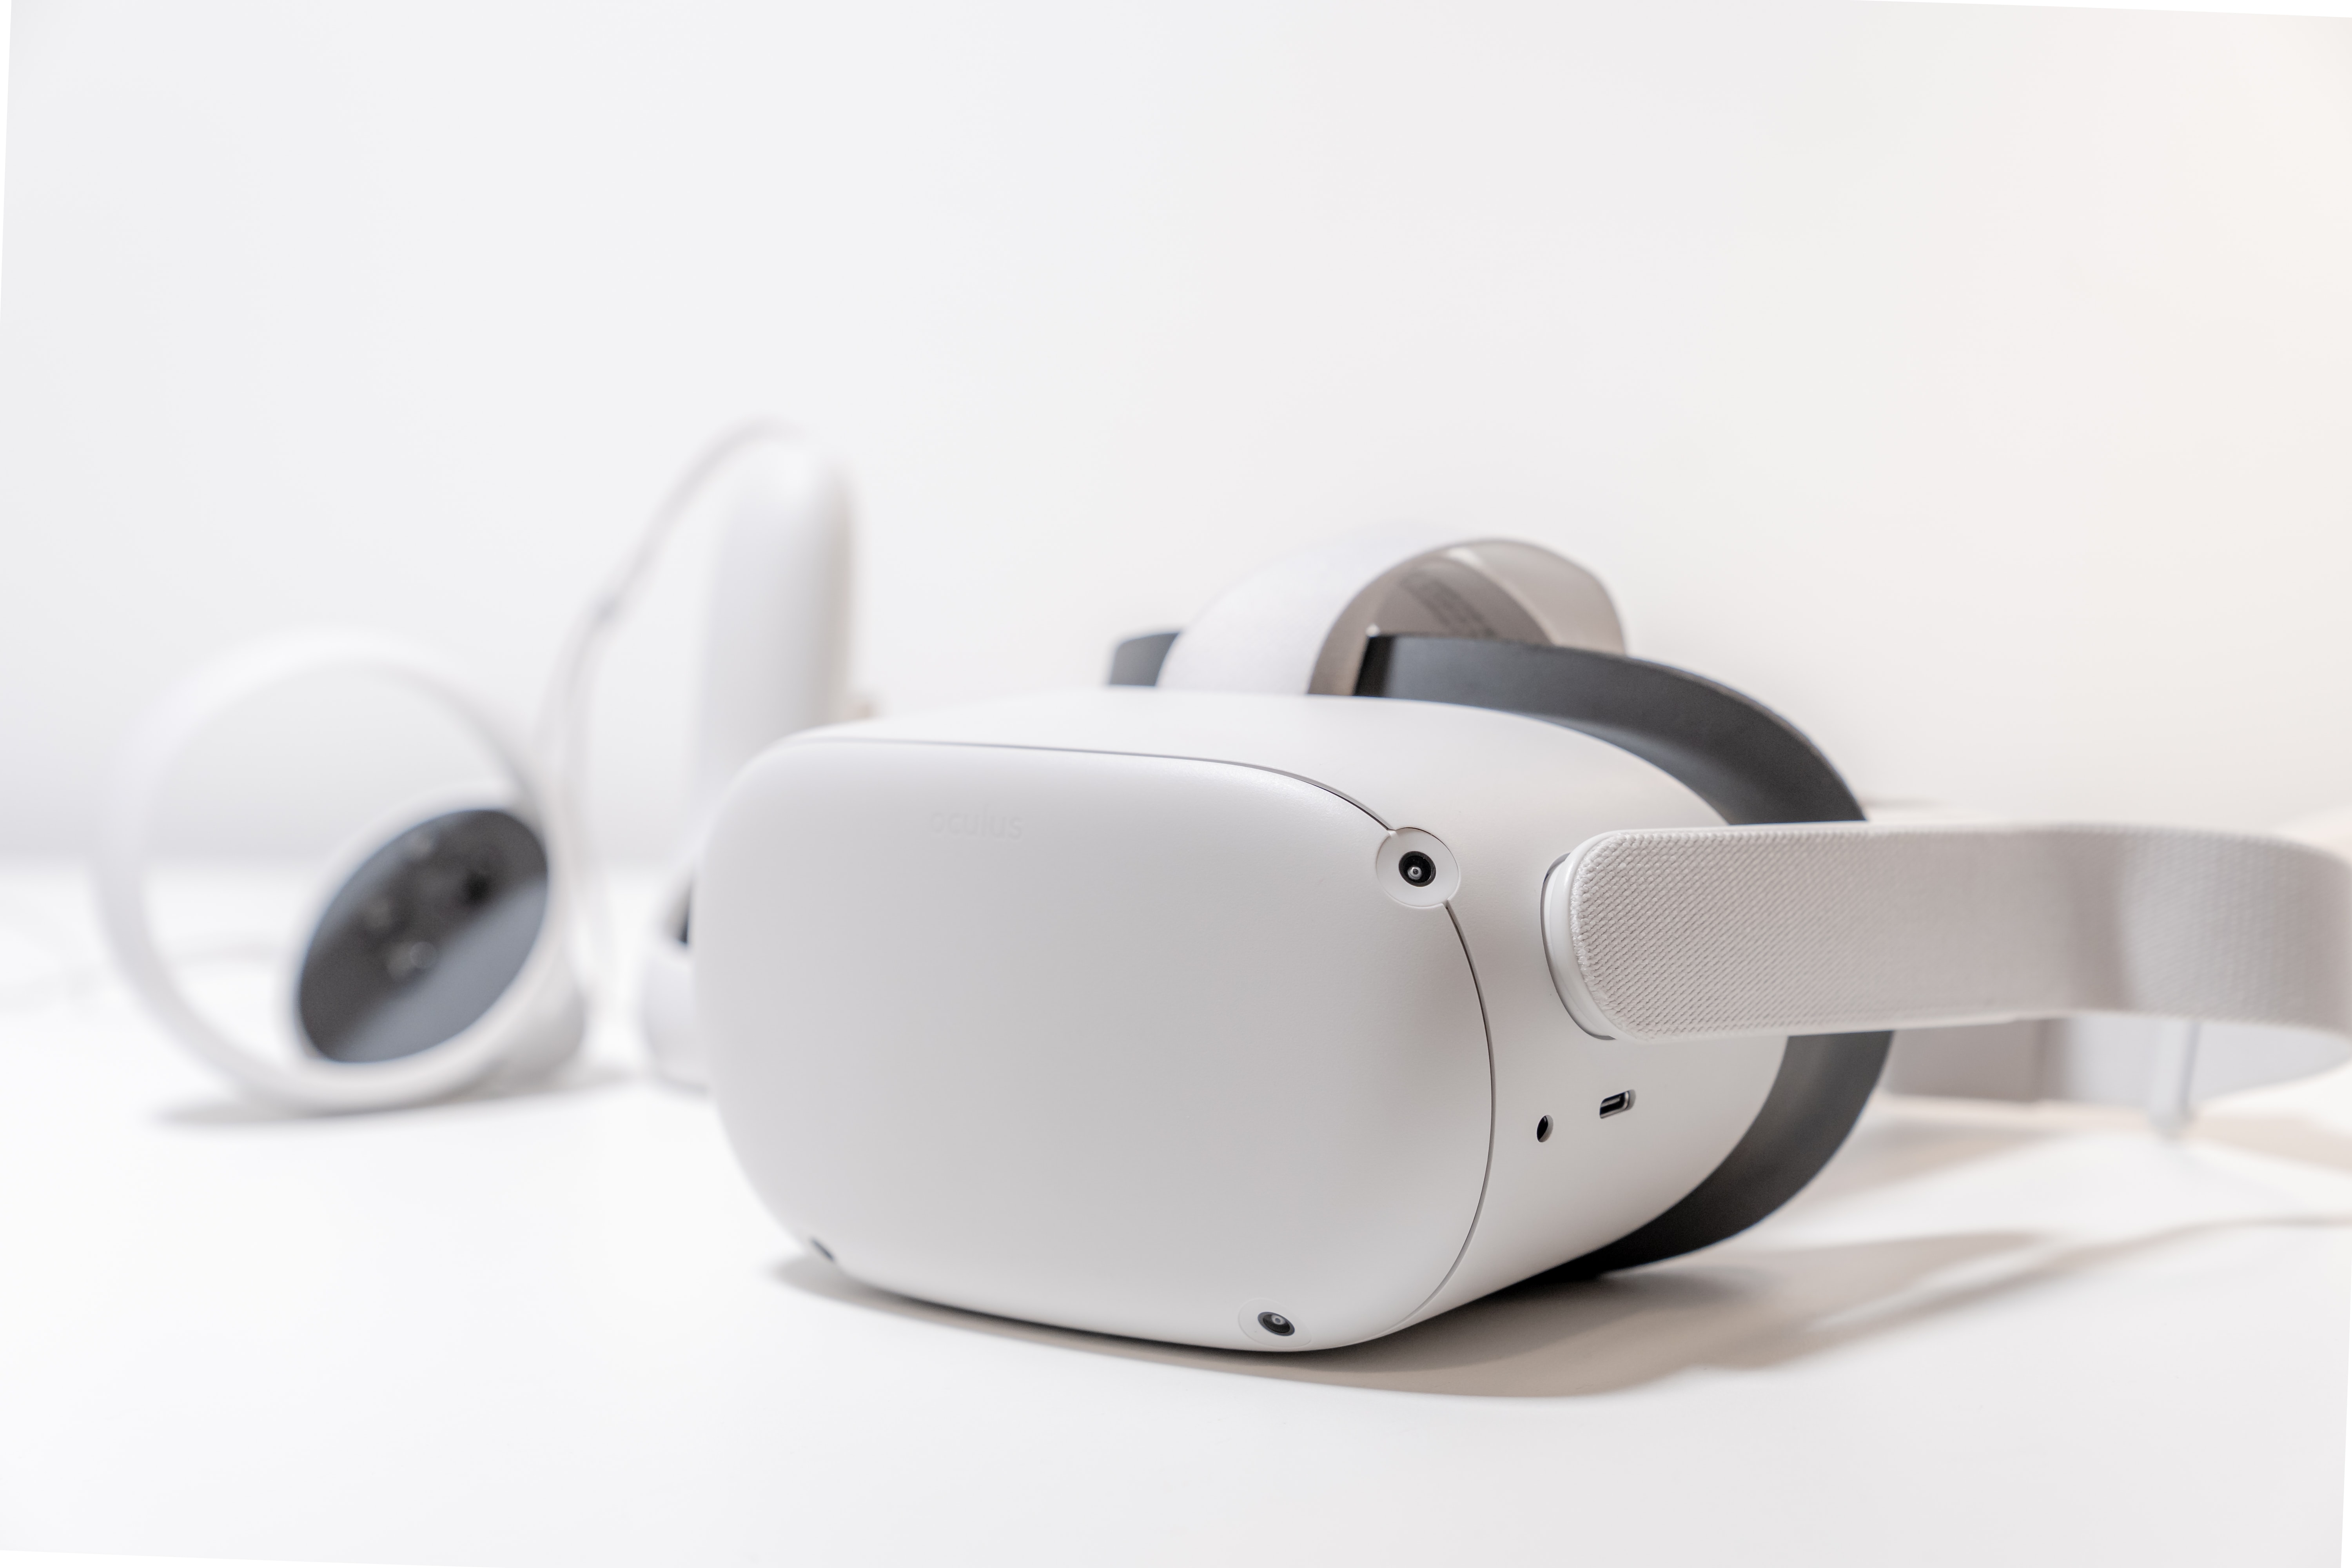 virtual reality headset can be used in business data analytics.